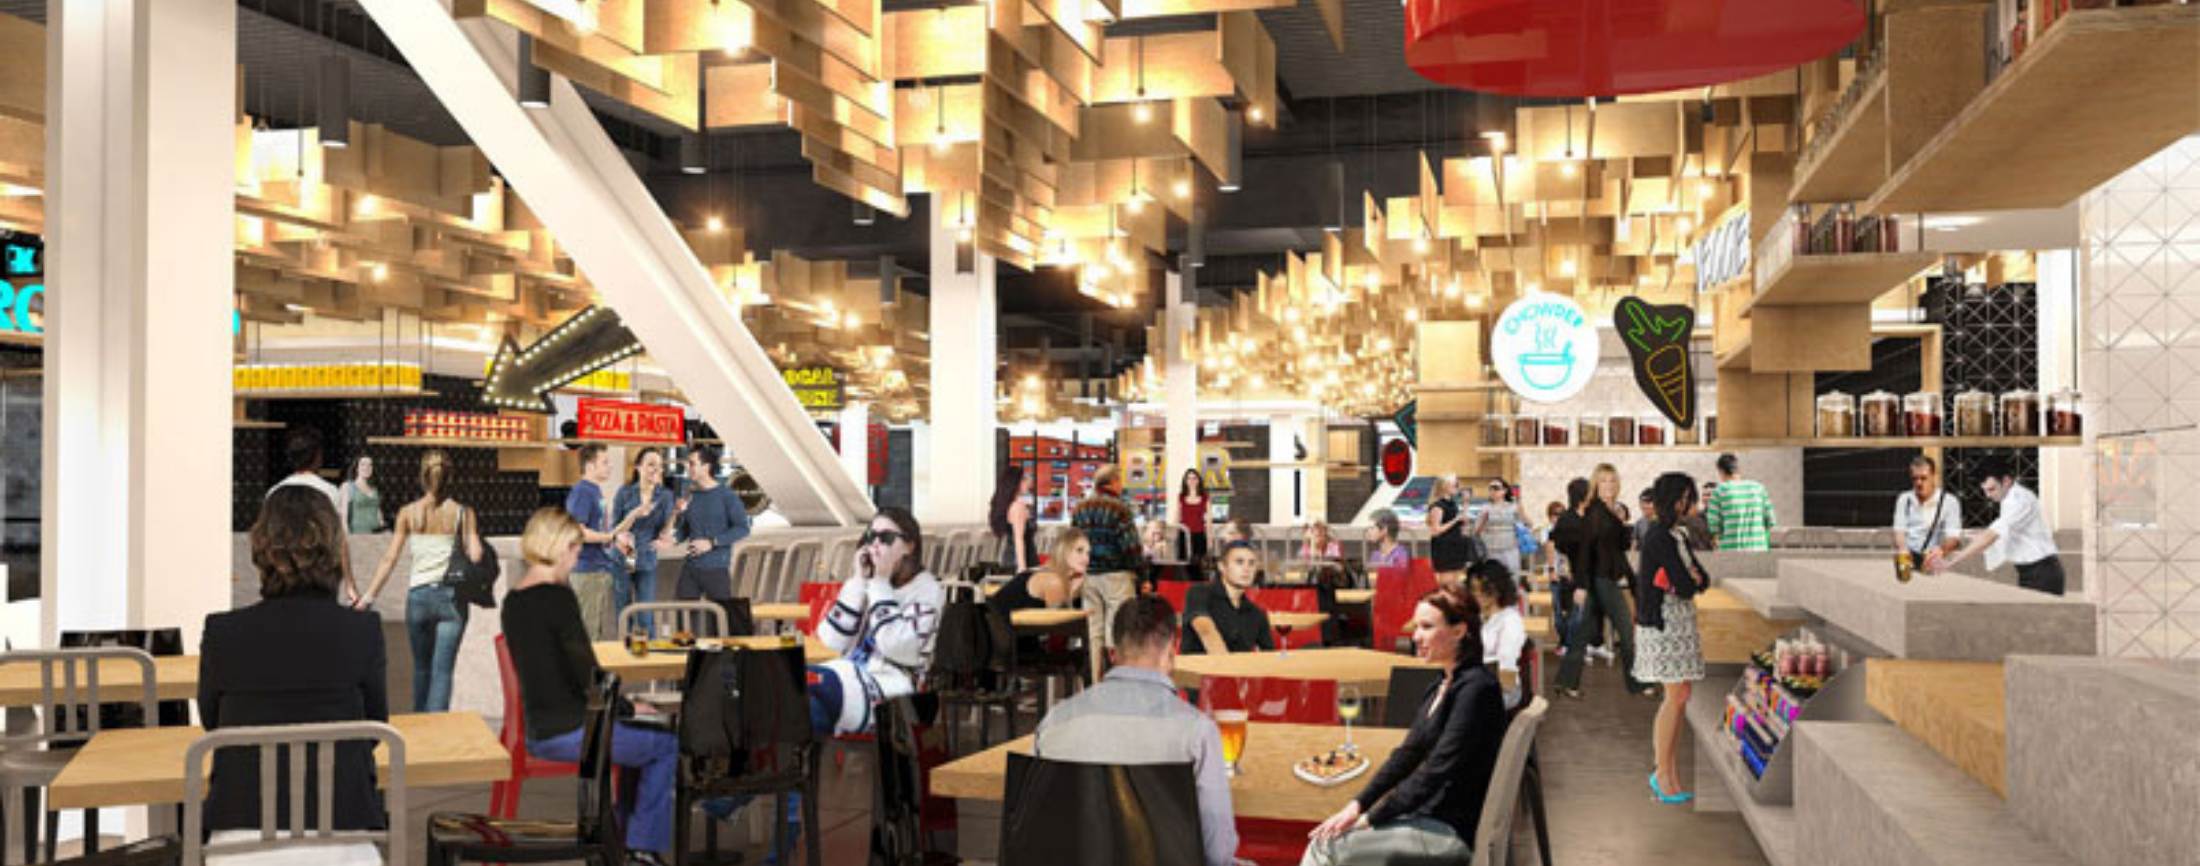 The Newest Addition to Boston’s Culinary Scene: Food Halls